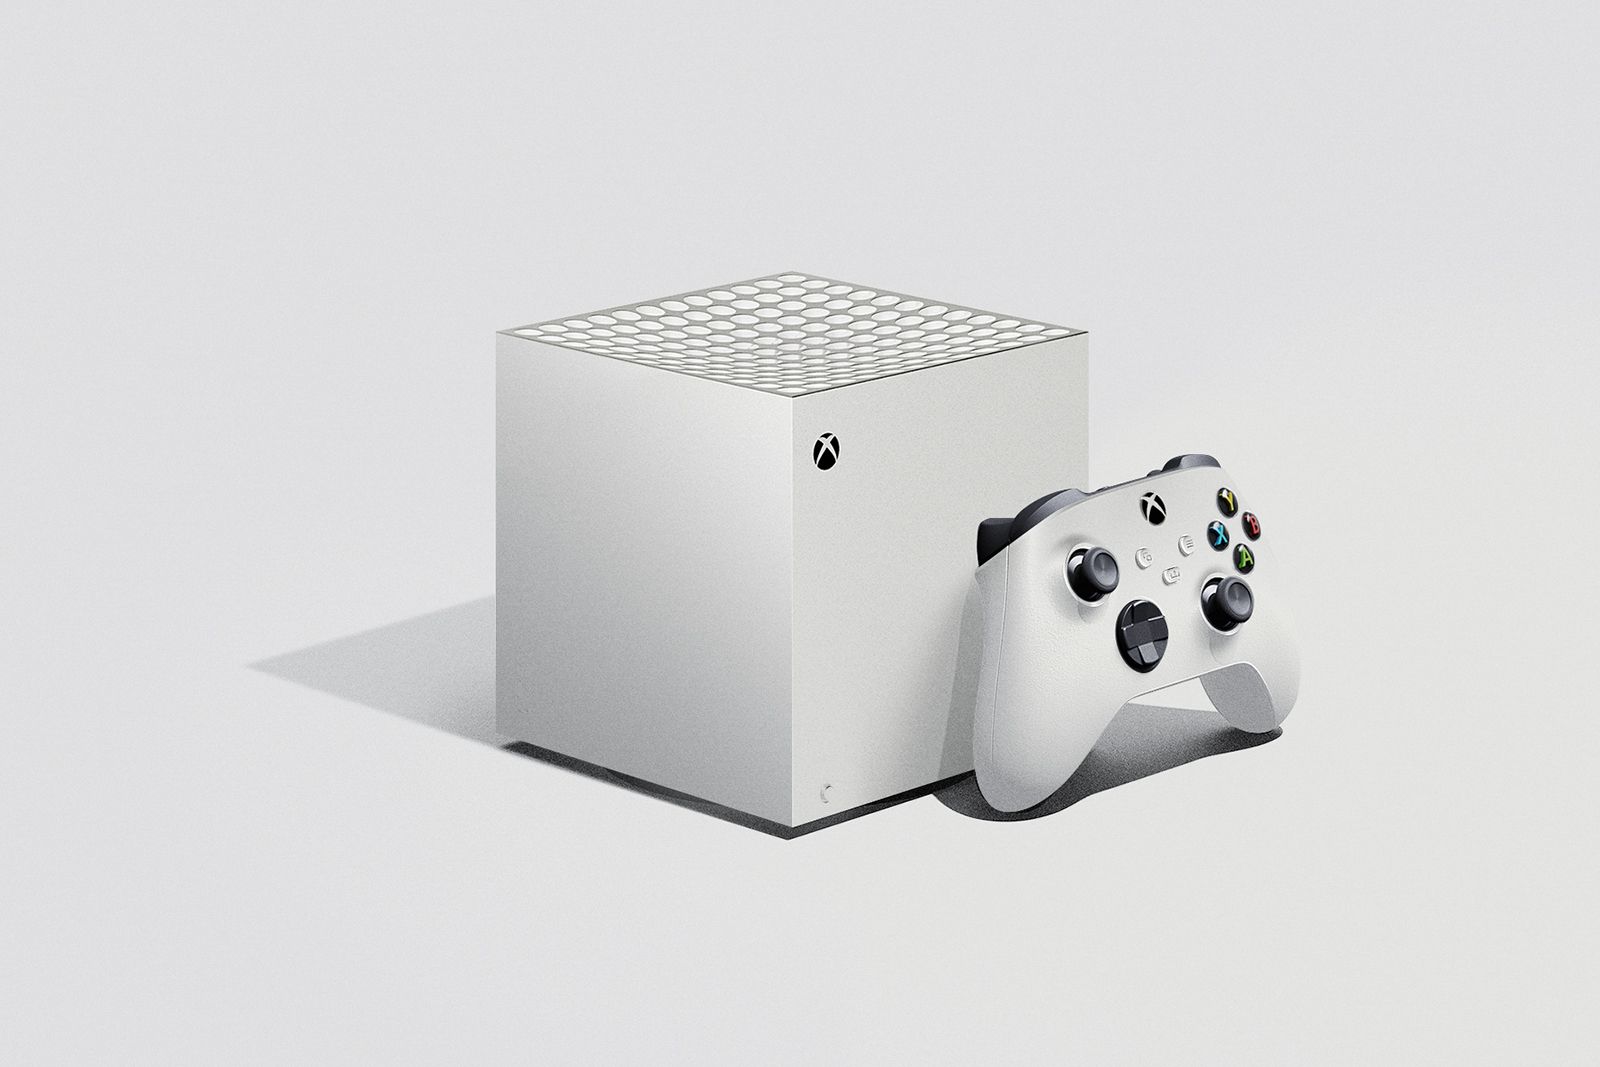 Evidence mounts for existence of a second next-gen Xbox – the Xbox Series S? photo 1